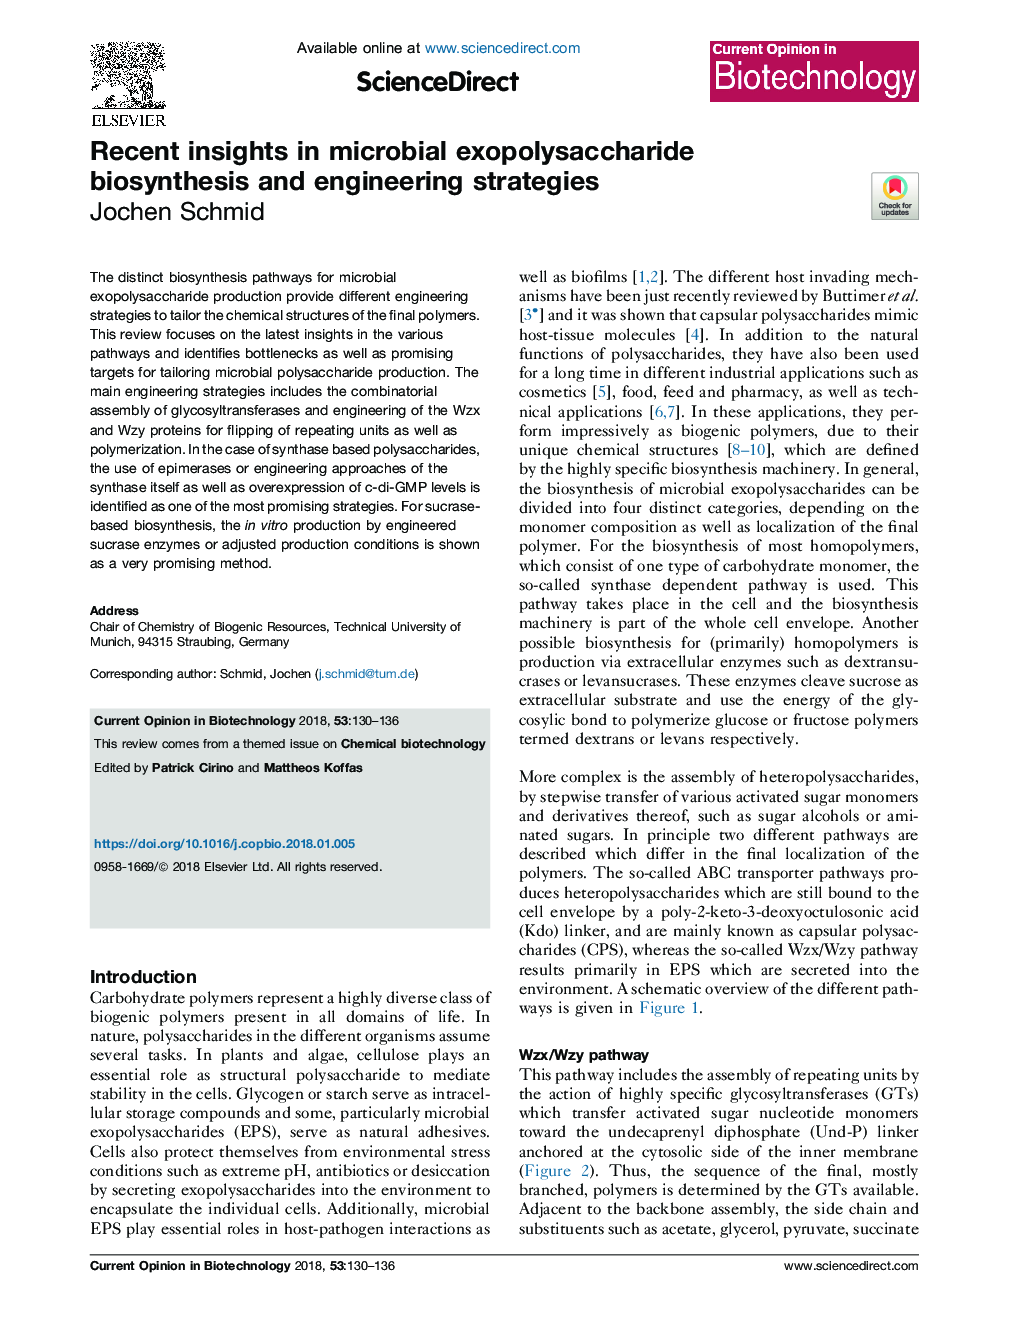 Recent insights in microbial exopolysaccharide biosynthesis and engineering strategies